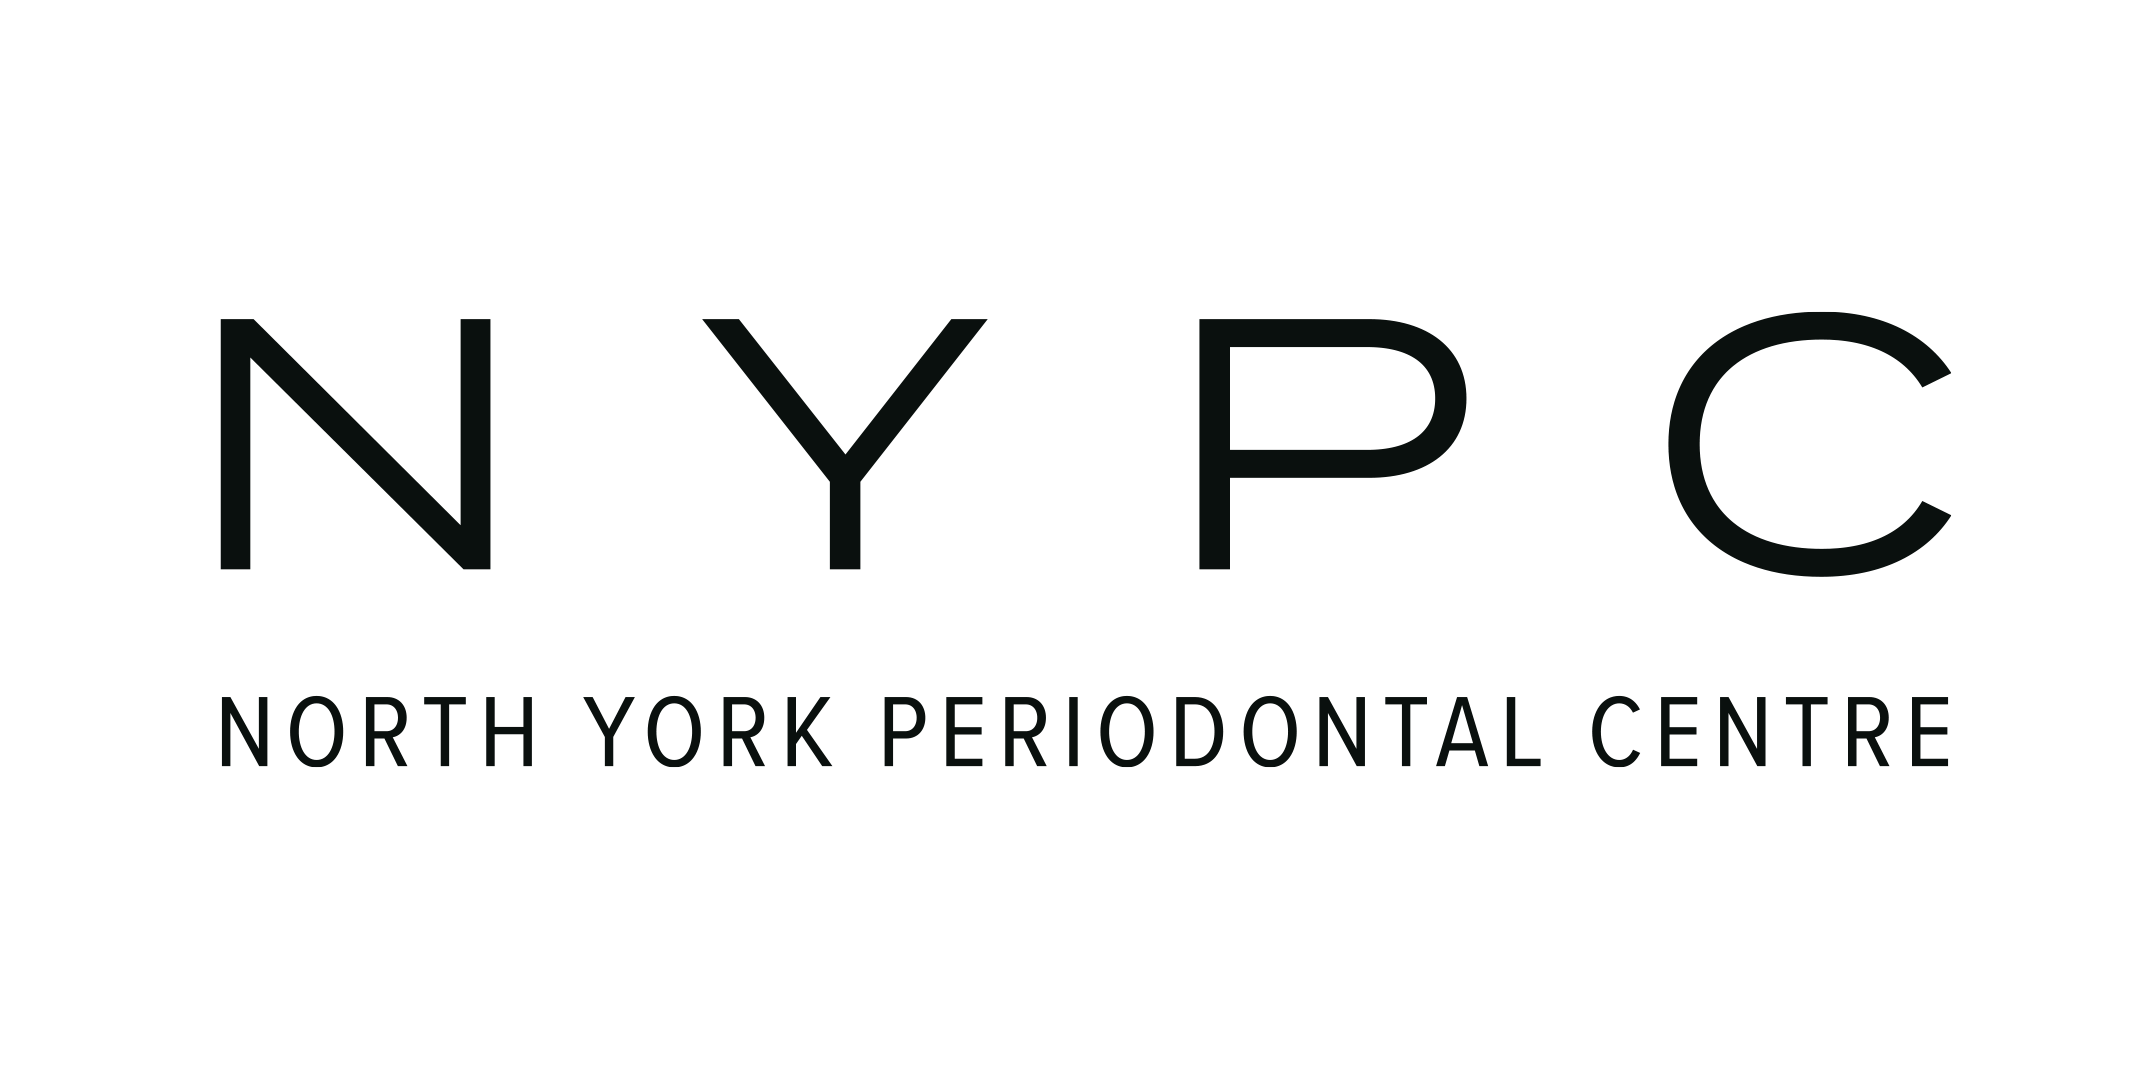 Link to North York Periodontal Centre home page